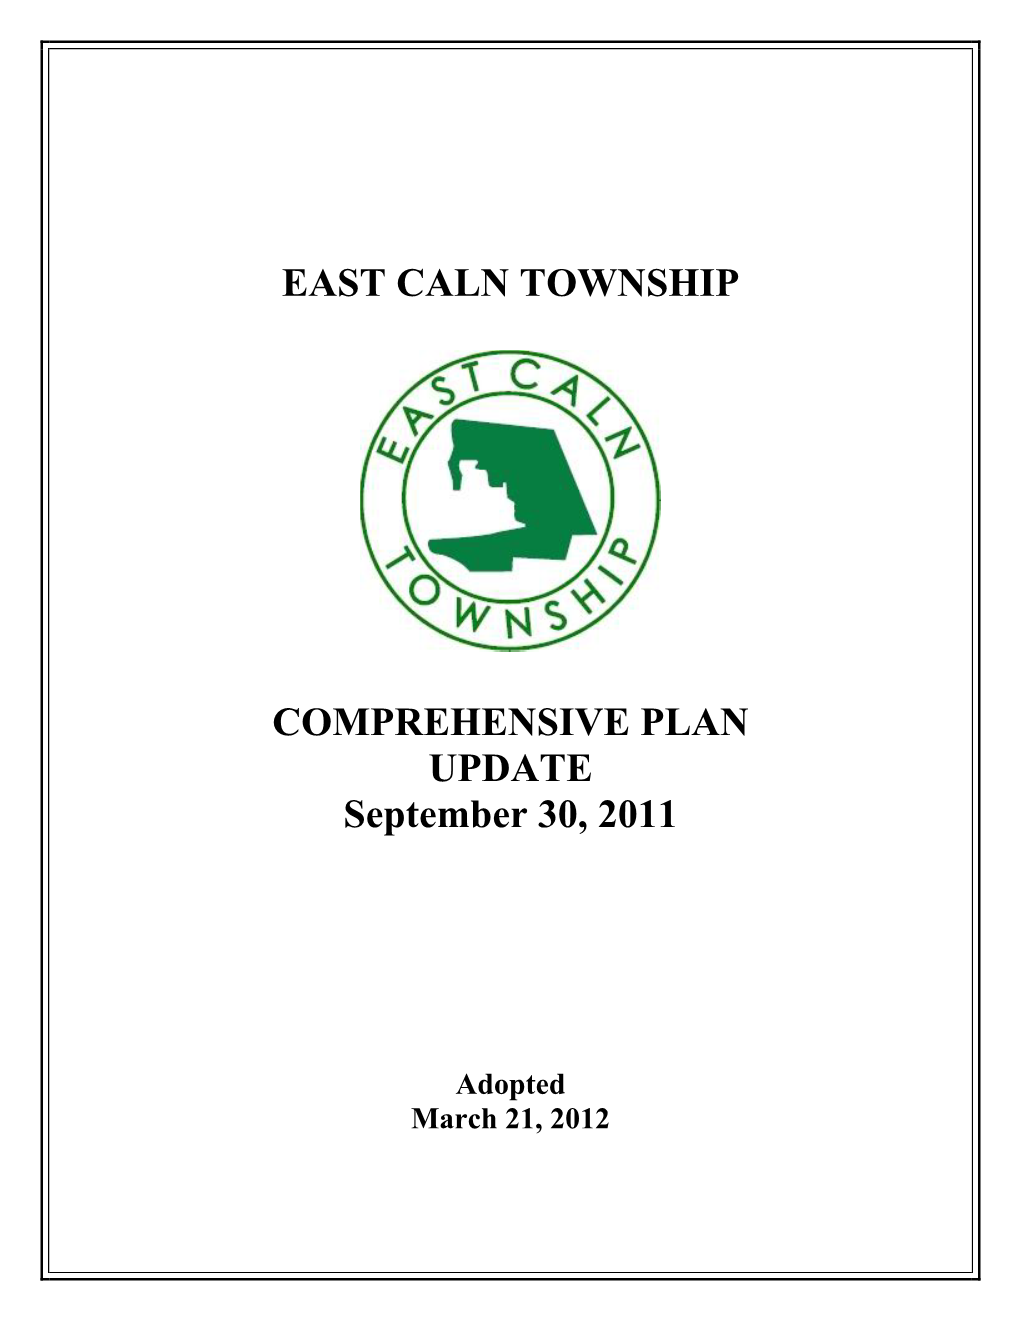 East Caln Township Comprehensive Plan Update Was Developed to Manage and Plan for Land Use and Development Within East Caln Township for the Foreseeable Future